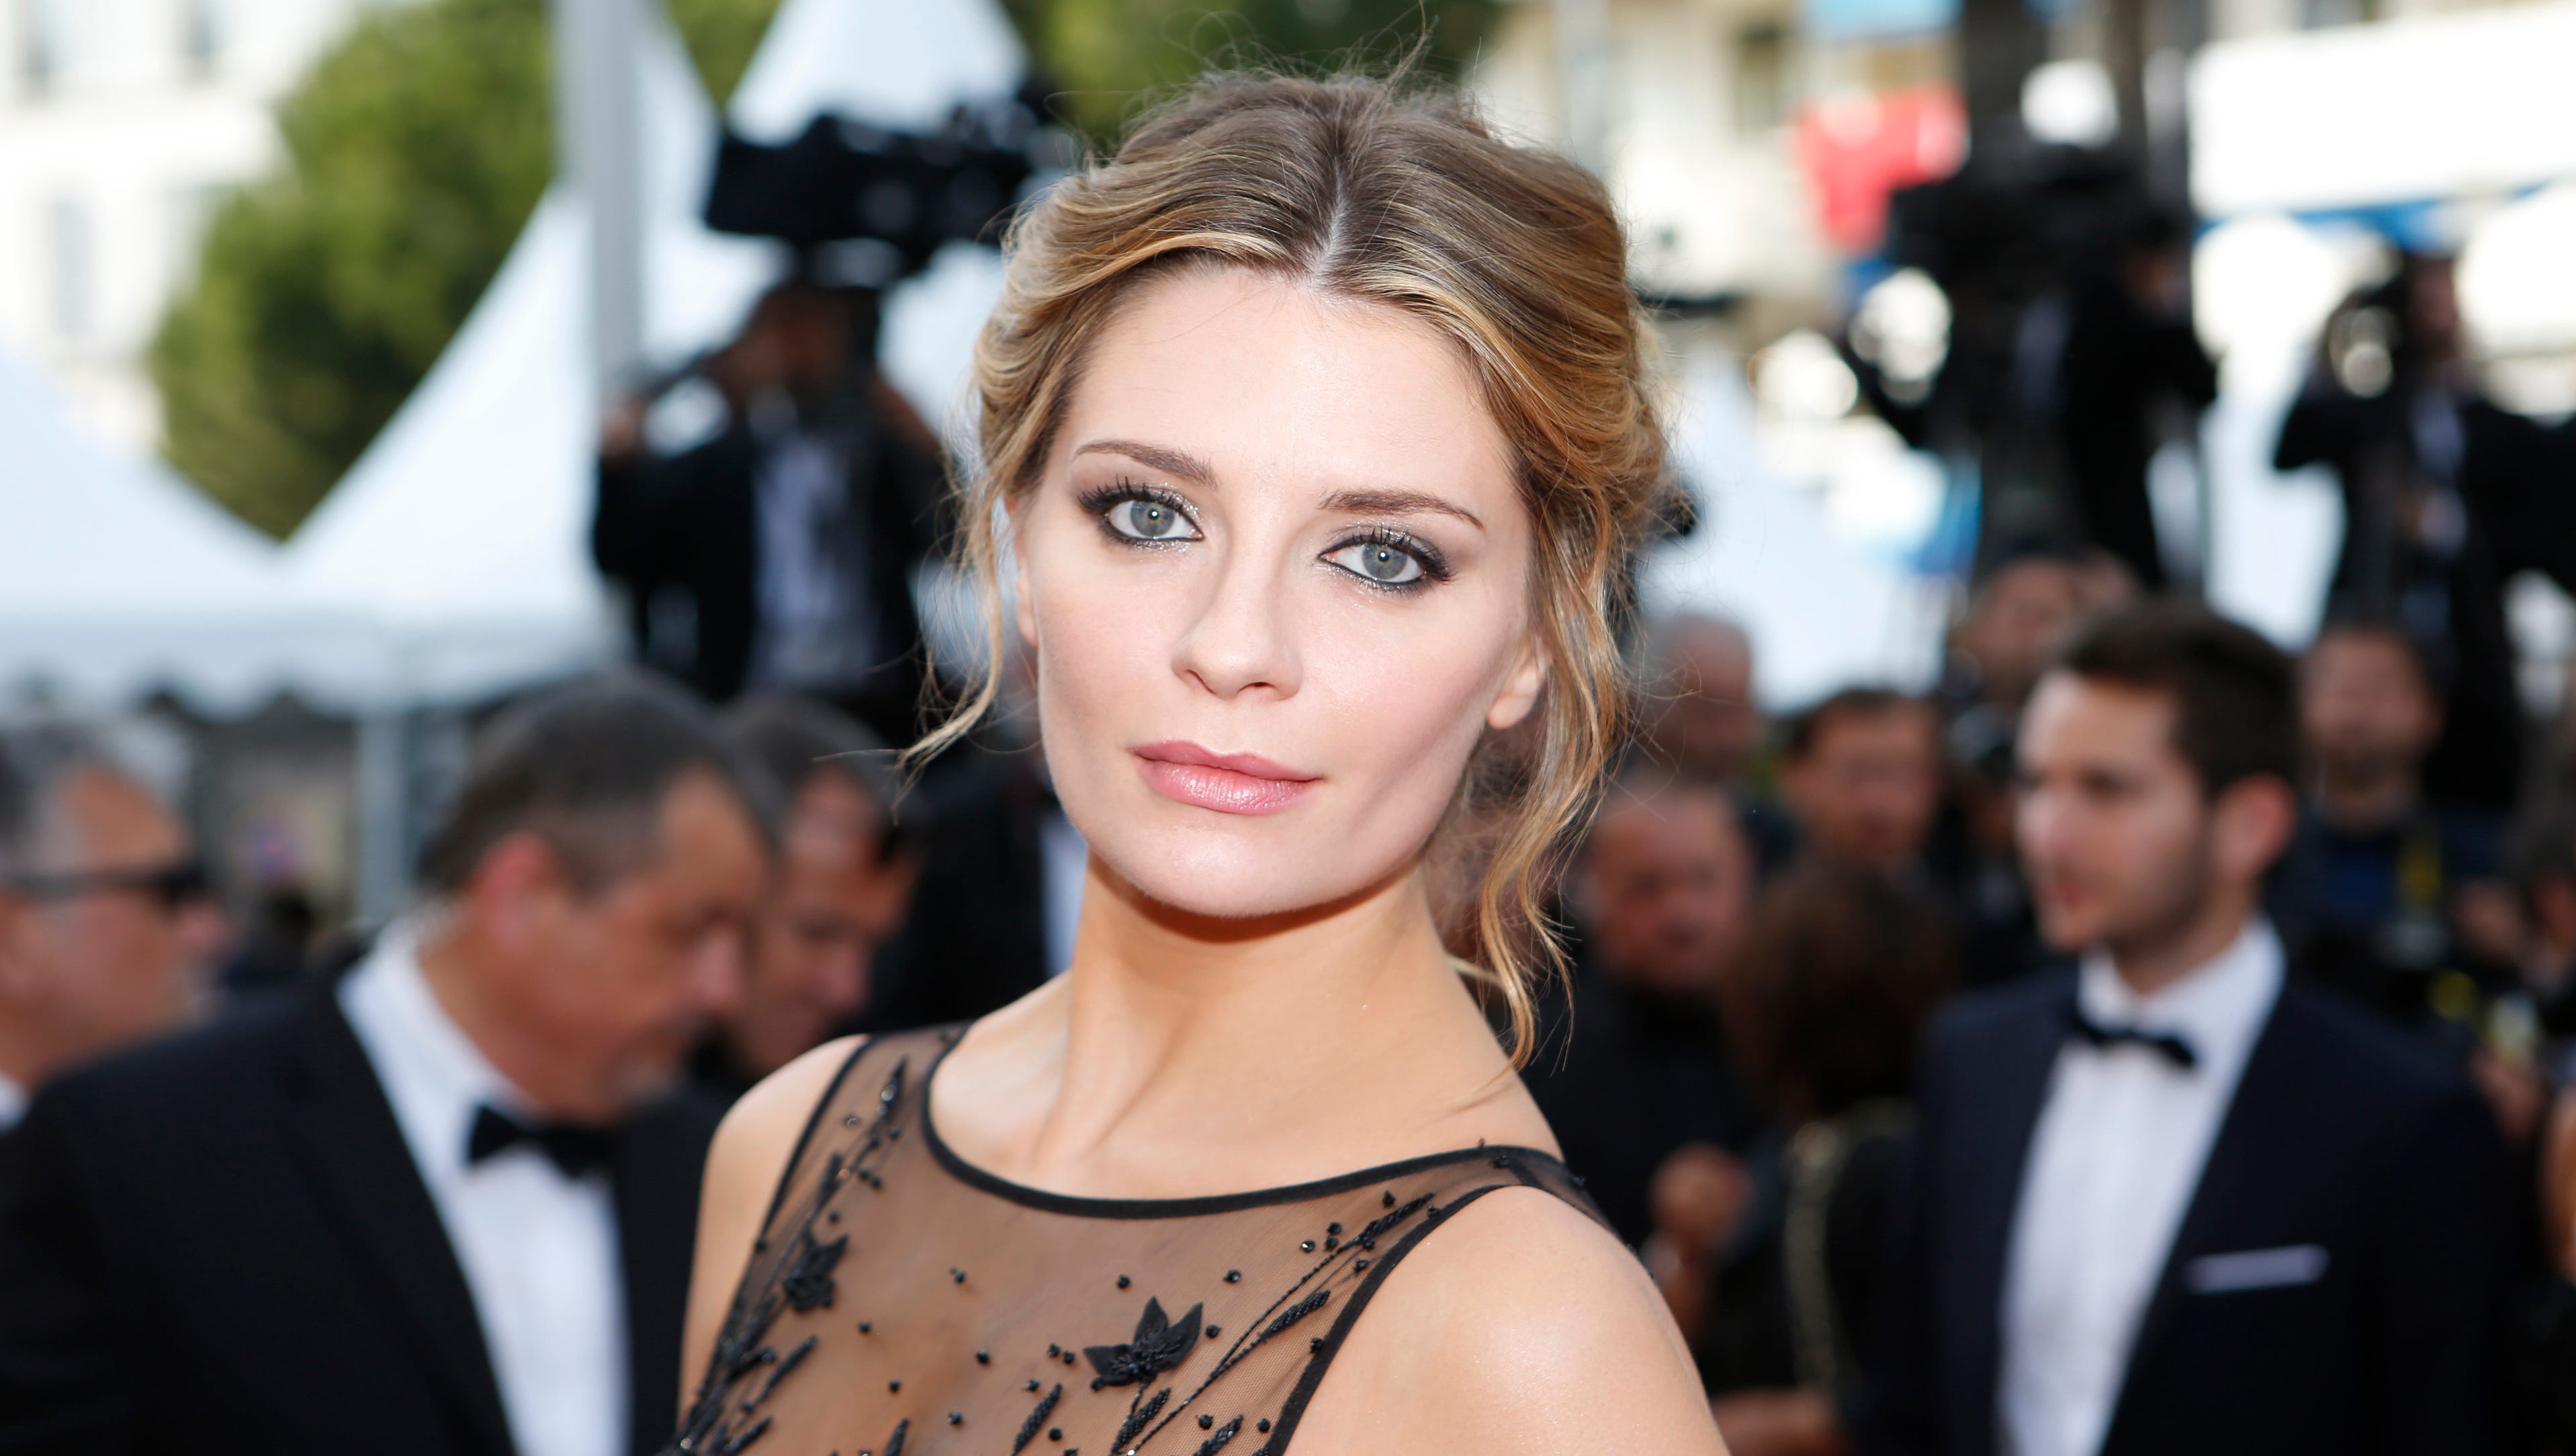 Mischa Barton Revenge Porn - Mischa Barton lawyer goes after revenge-porn sellers: Proceed at your peril